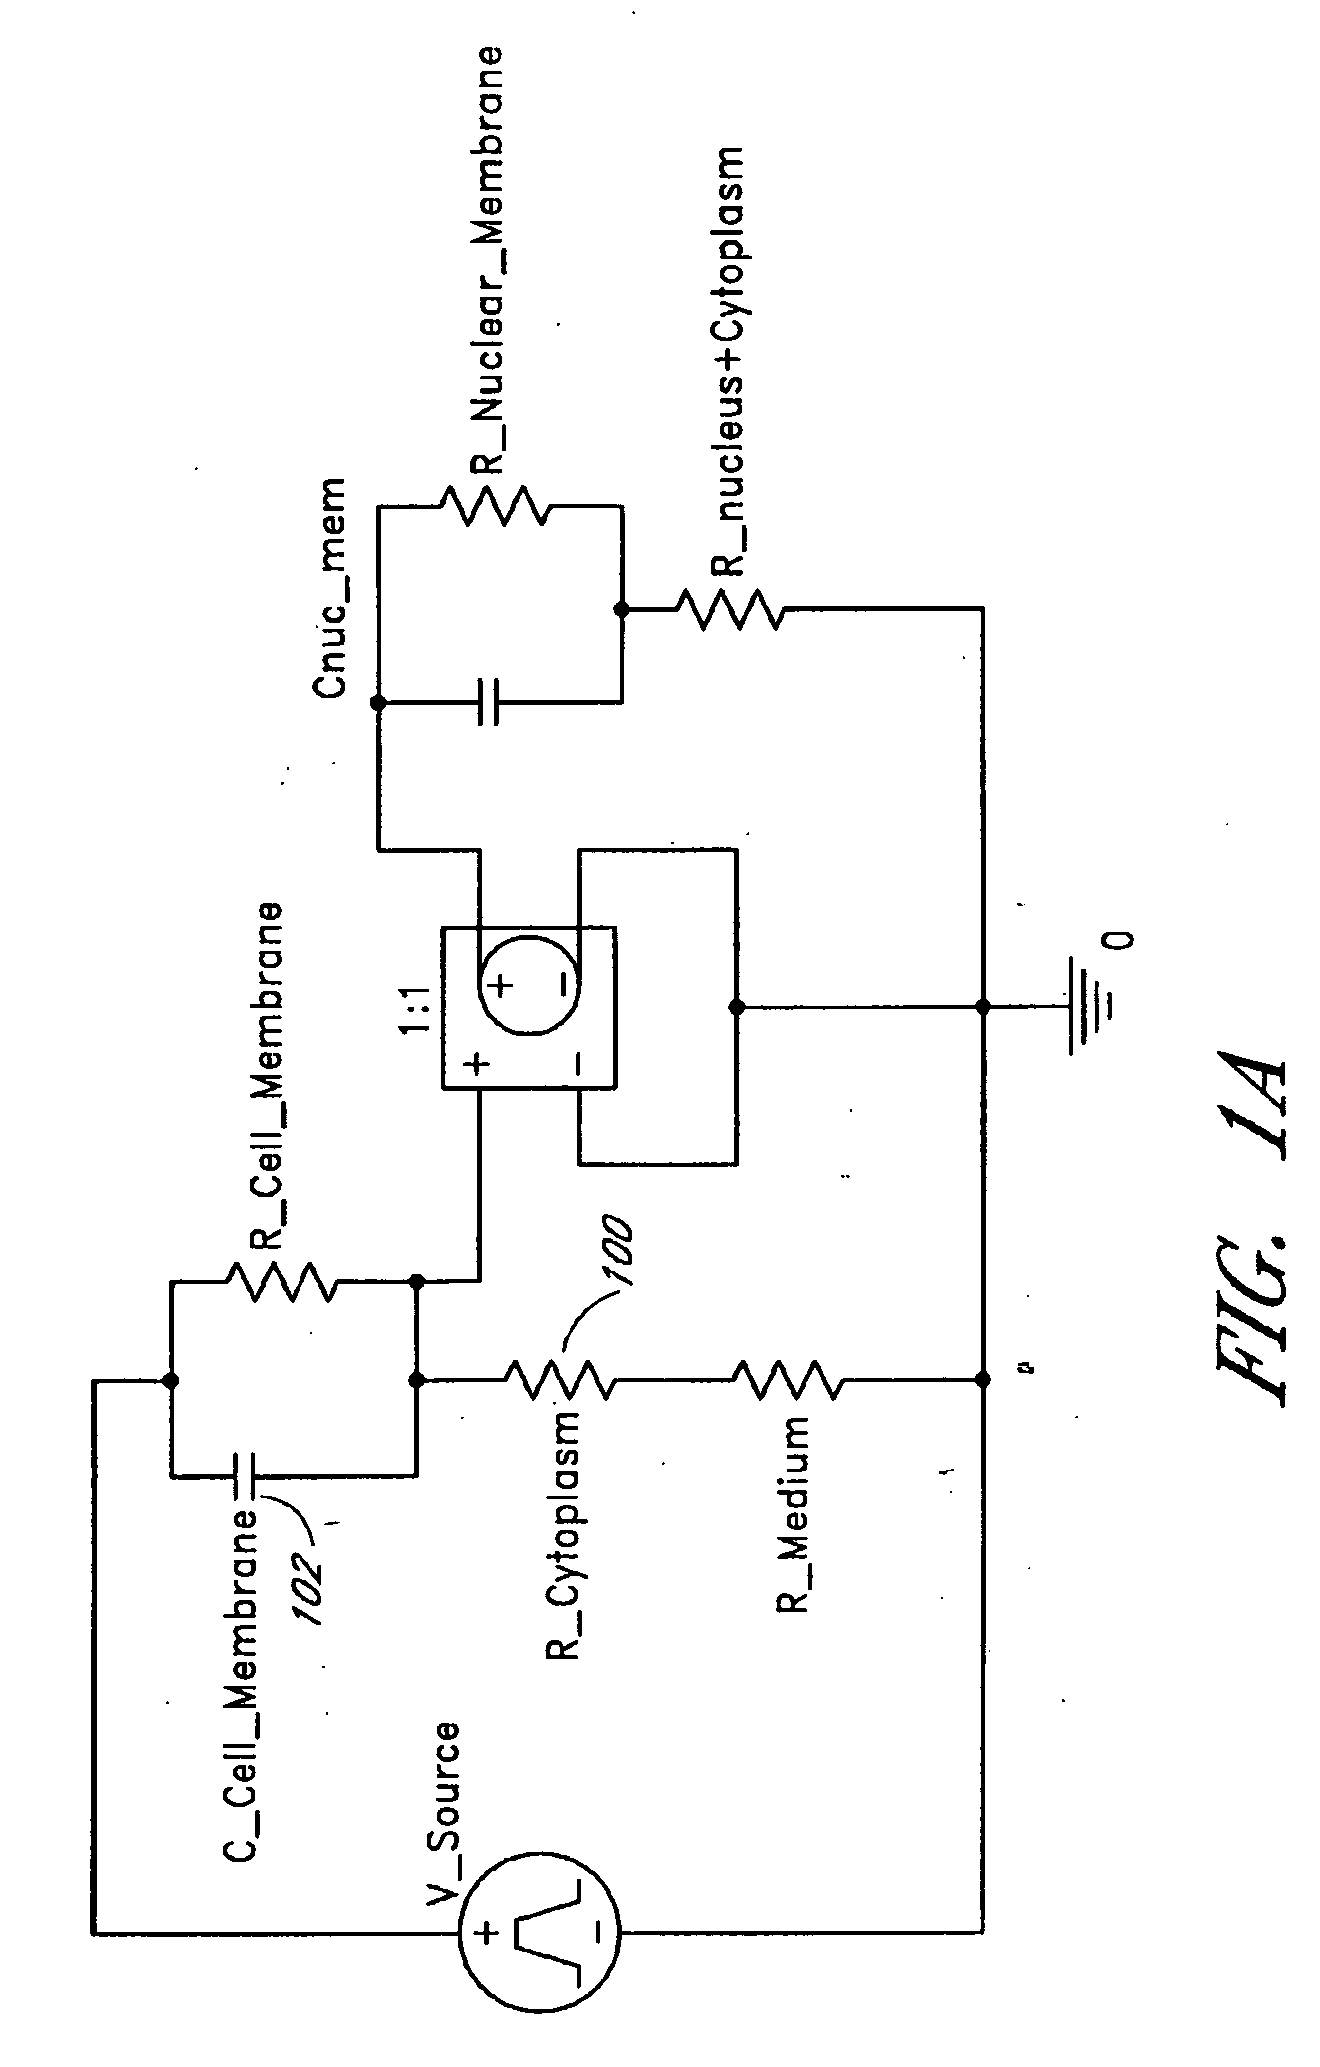 Method for intracellular modifications within living cells using pulsed electric fields